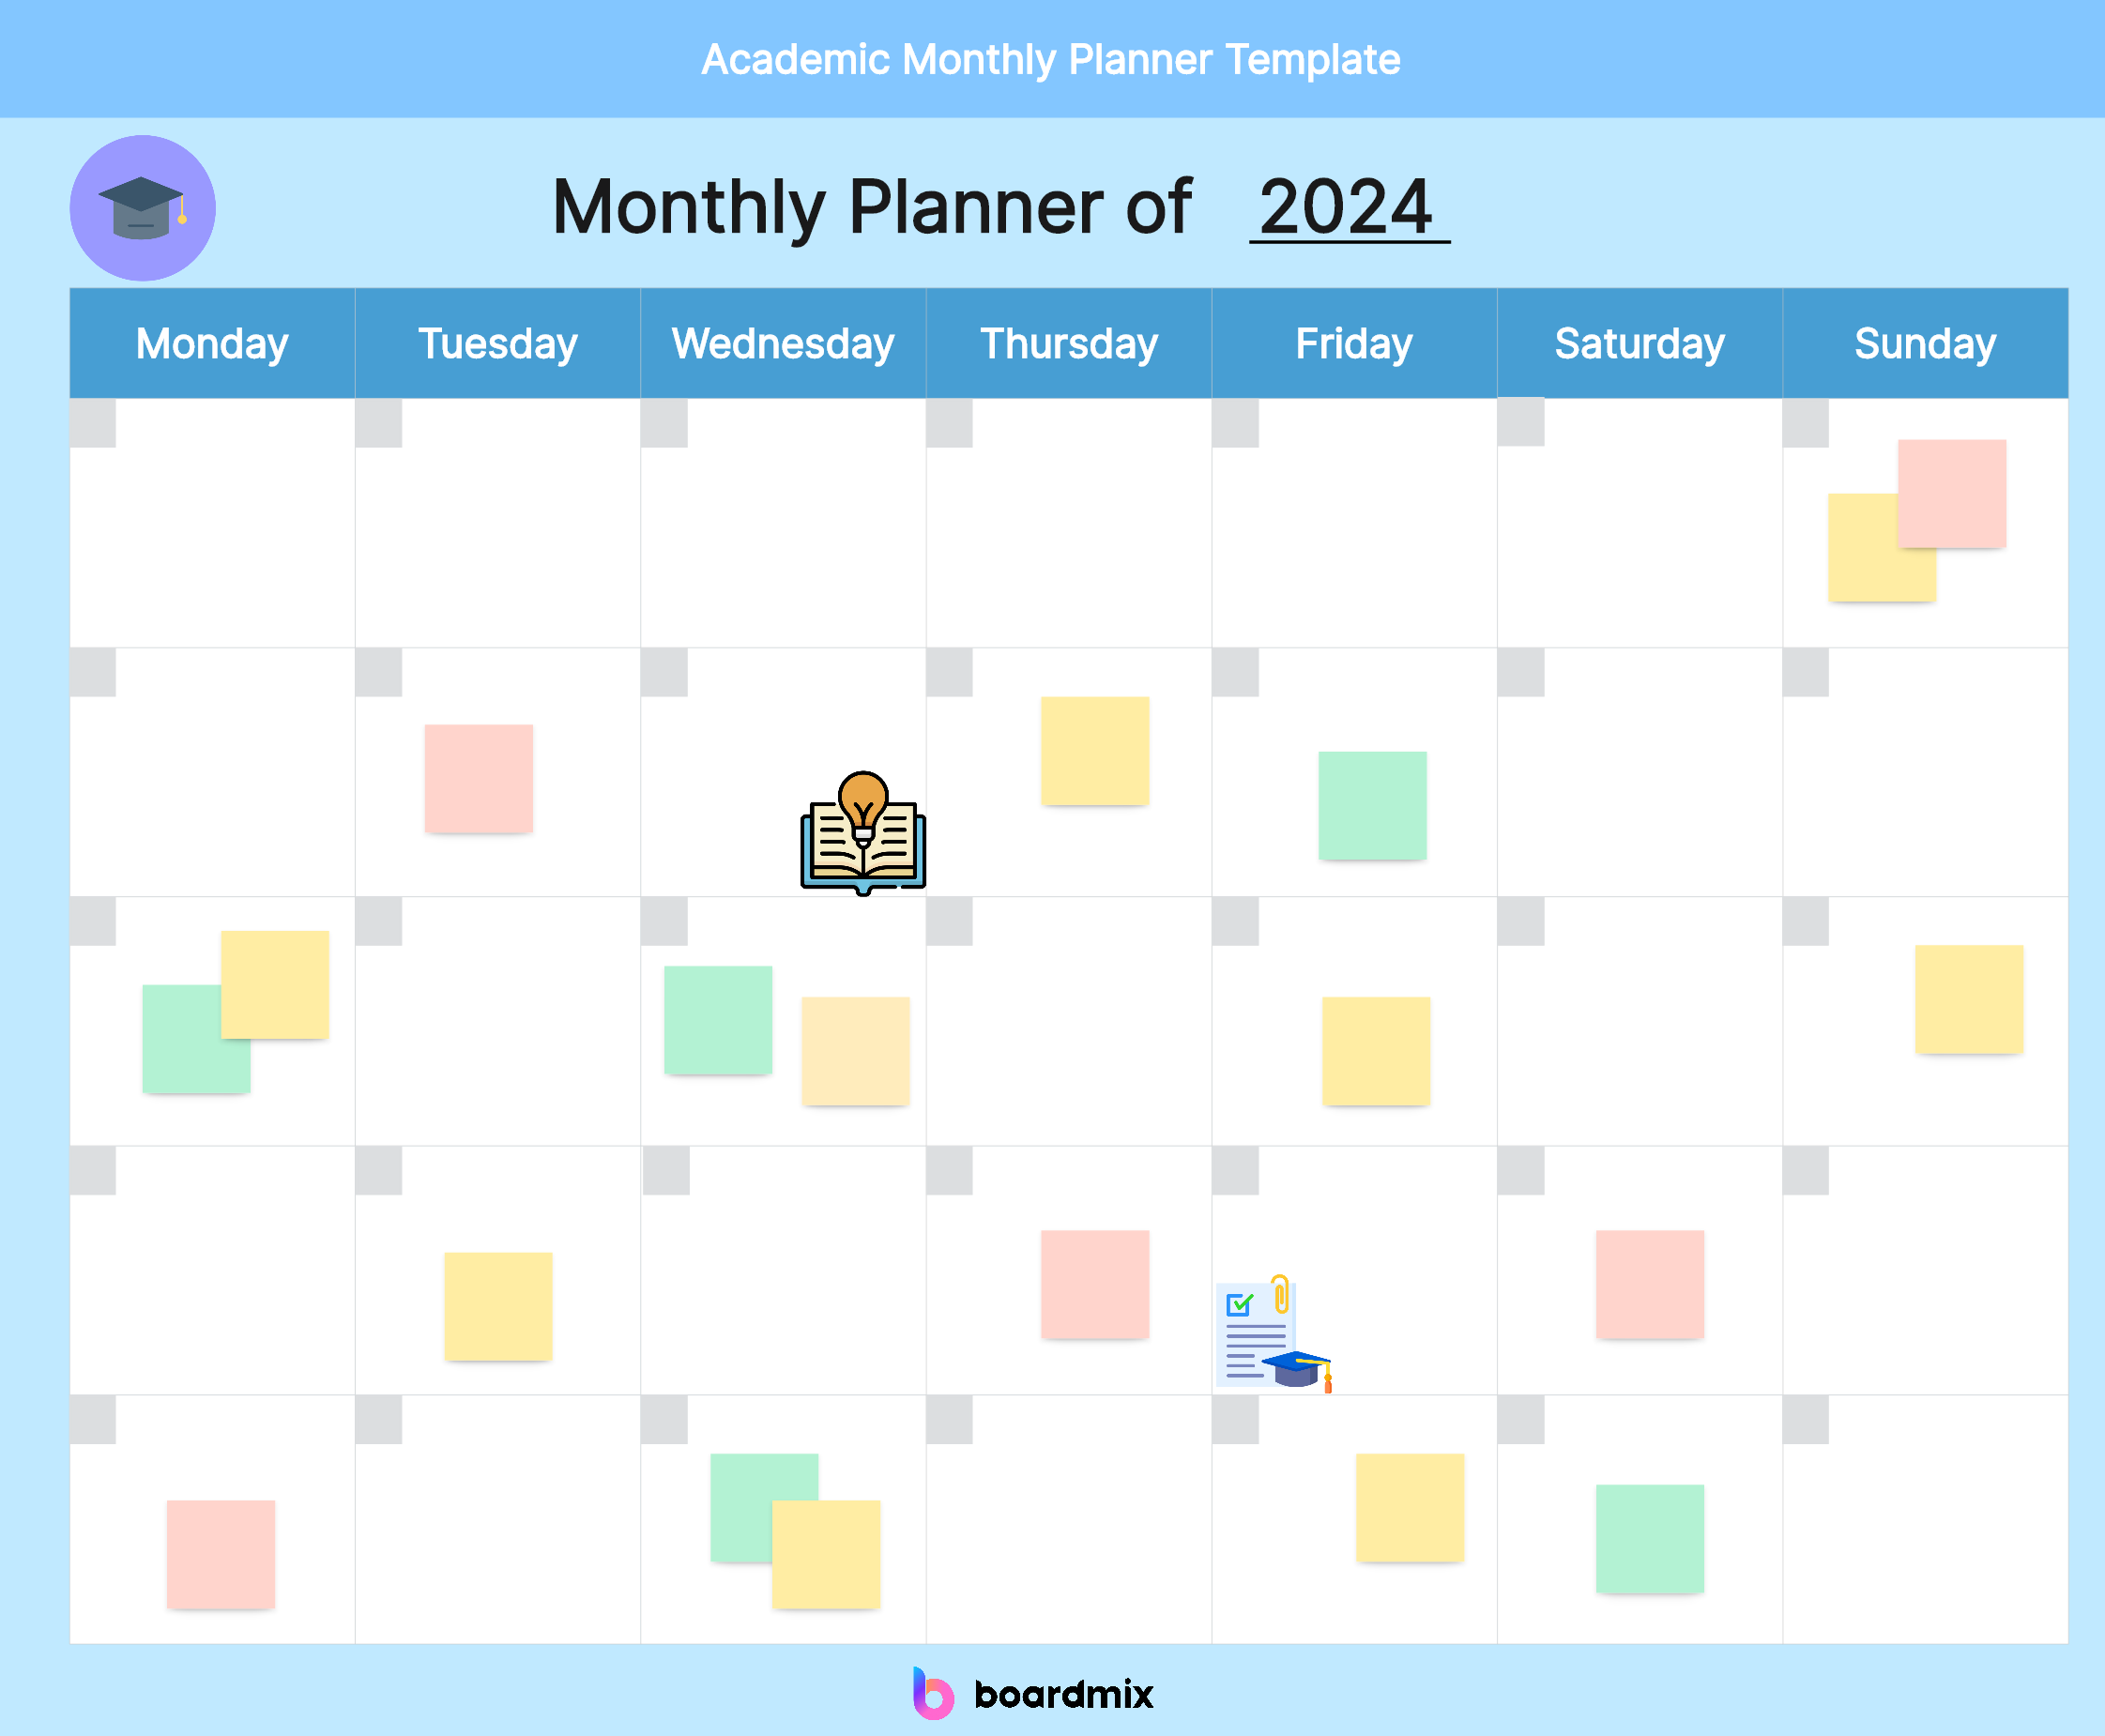 academic-monthly-planner-template.png